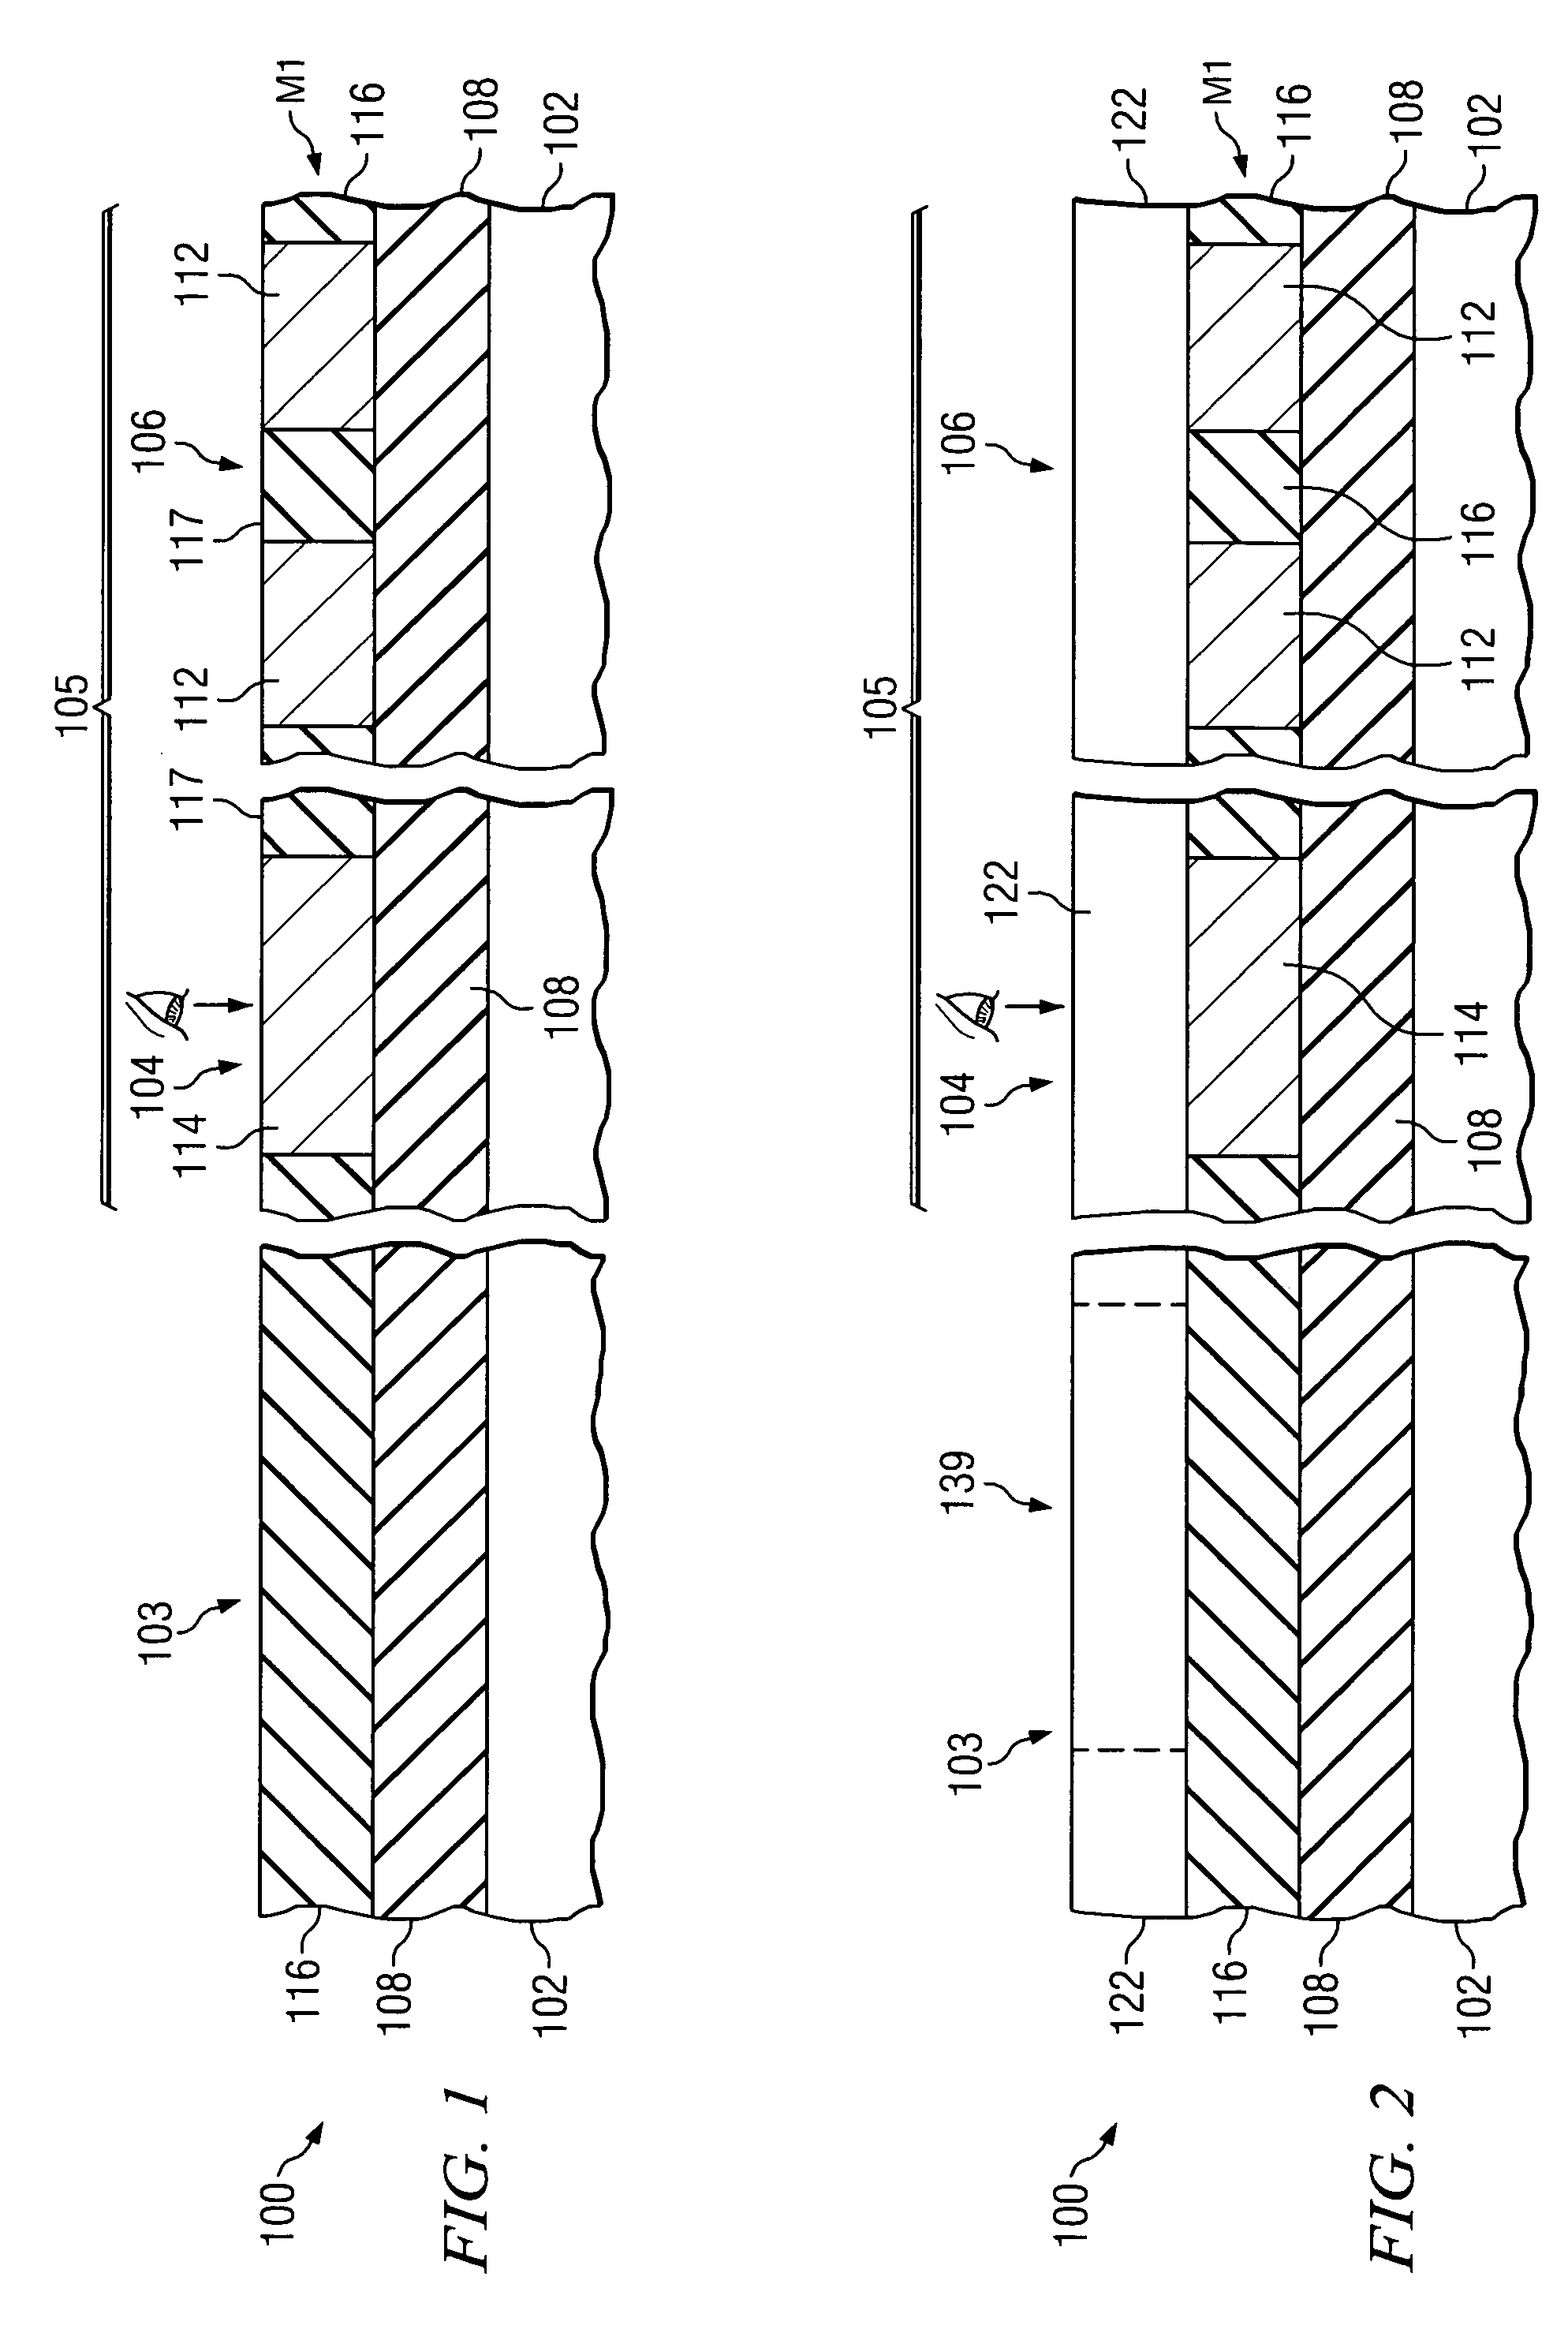 Deep alignment marks on edge chips for subsequent alignment of opaque layers